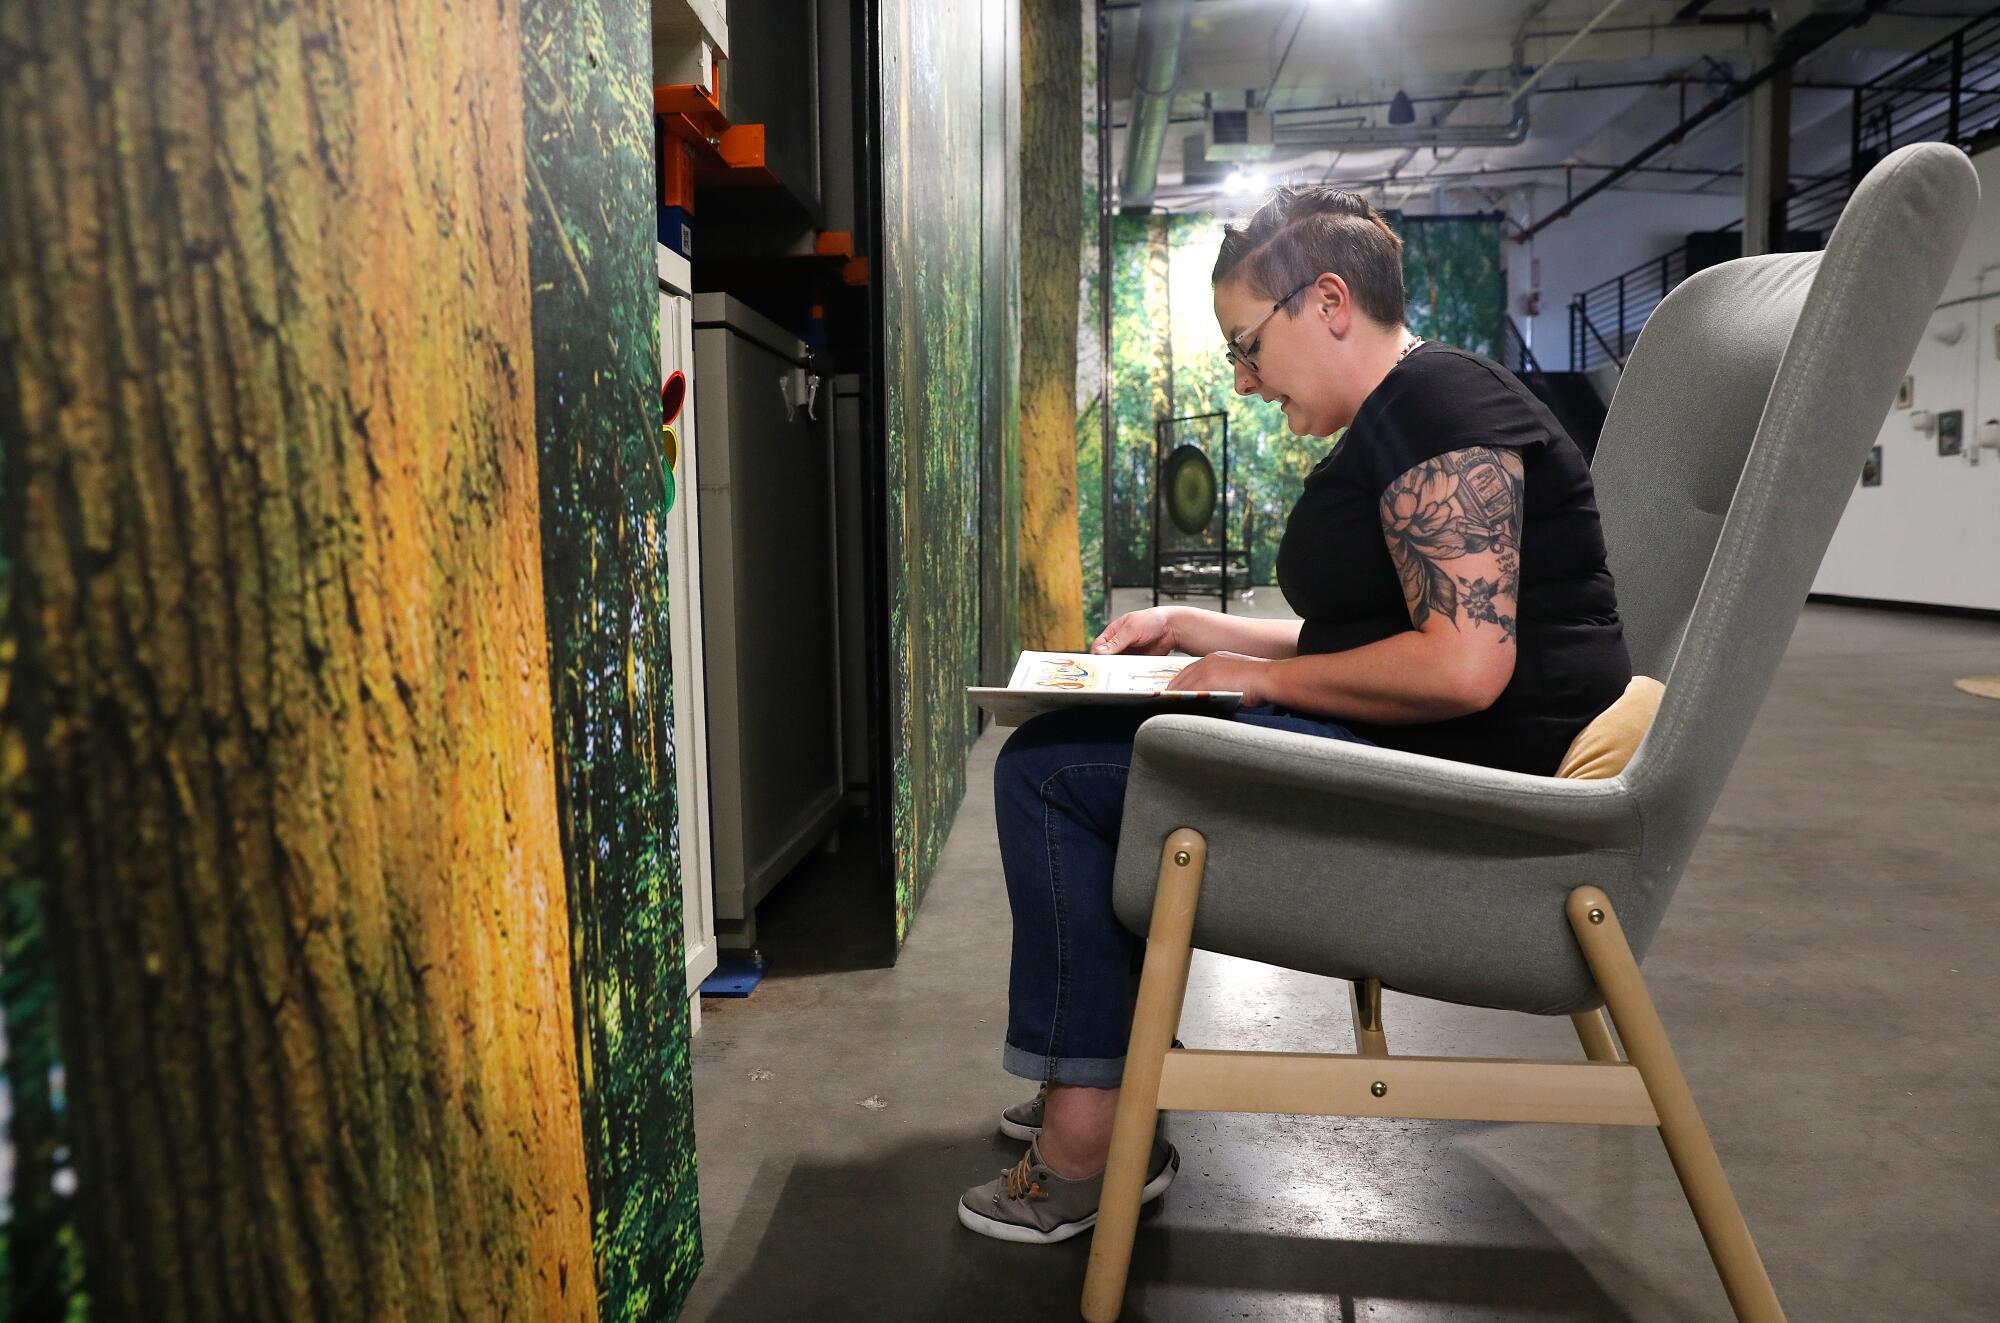 Katey Houston sits in a chair reading a book to children undergoing human composting in front of forest-themed panels.